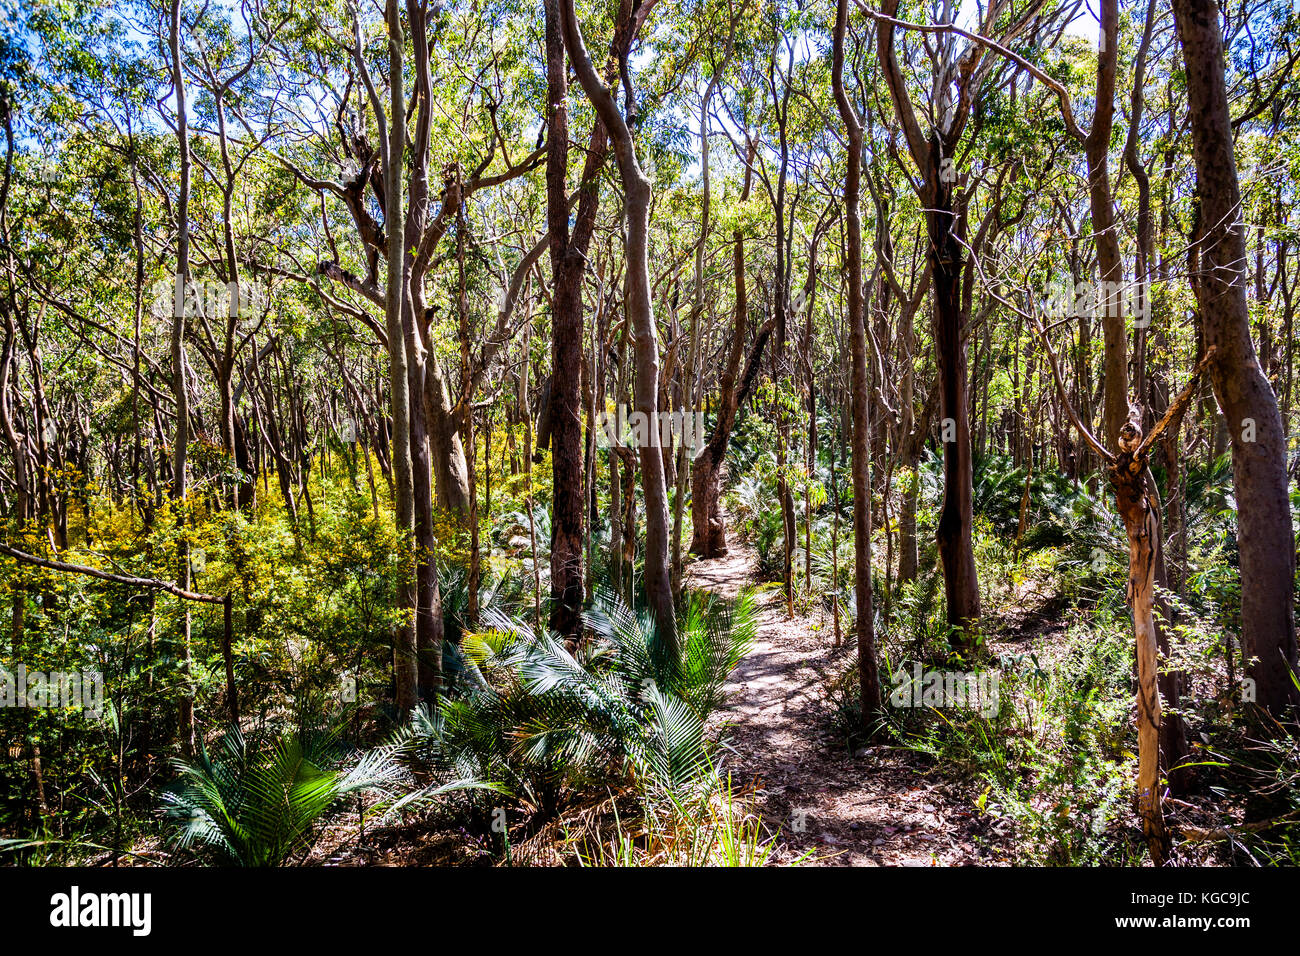 Australia, New South Wales, Central Coast, Bouddi National Park, ancient cycad ferns grow below a forest of Angophora costata, Sydney Red Gum, along t Stock Photo